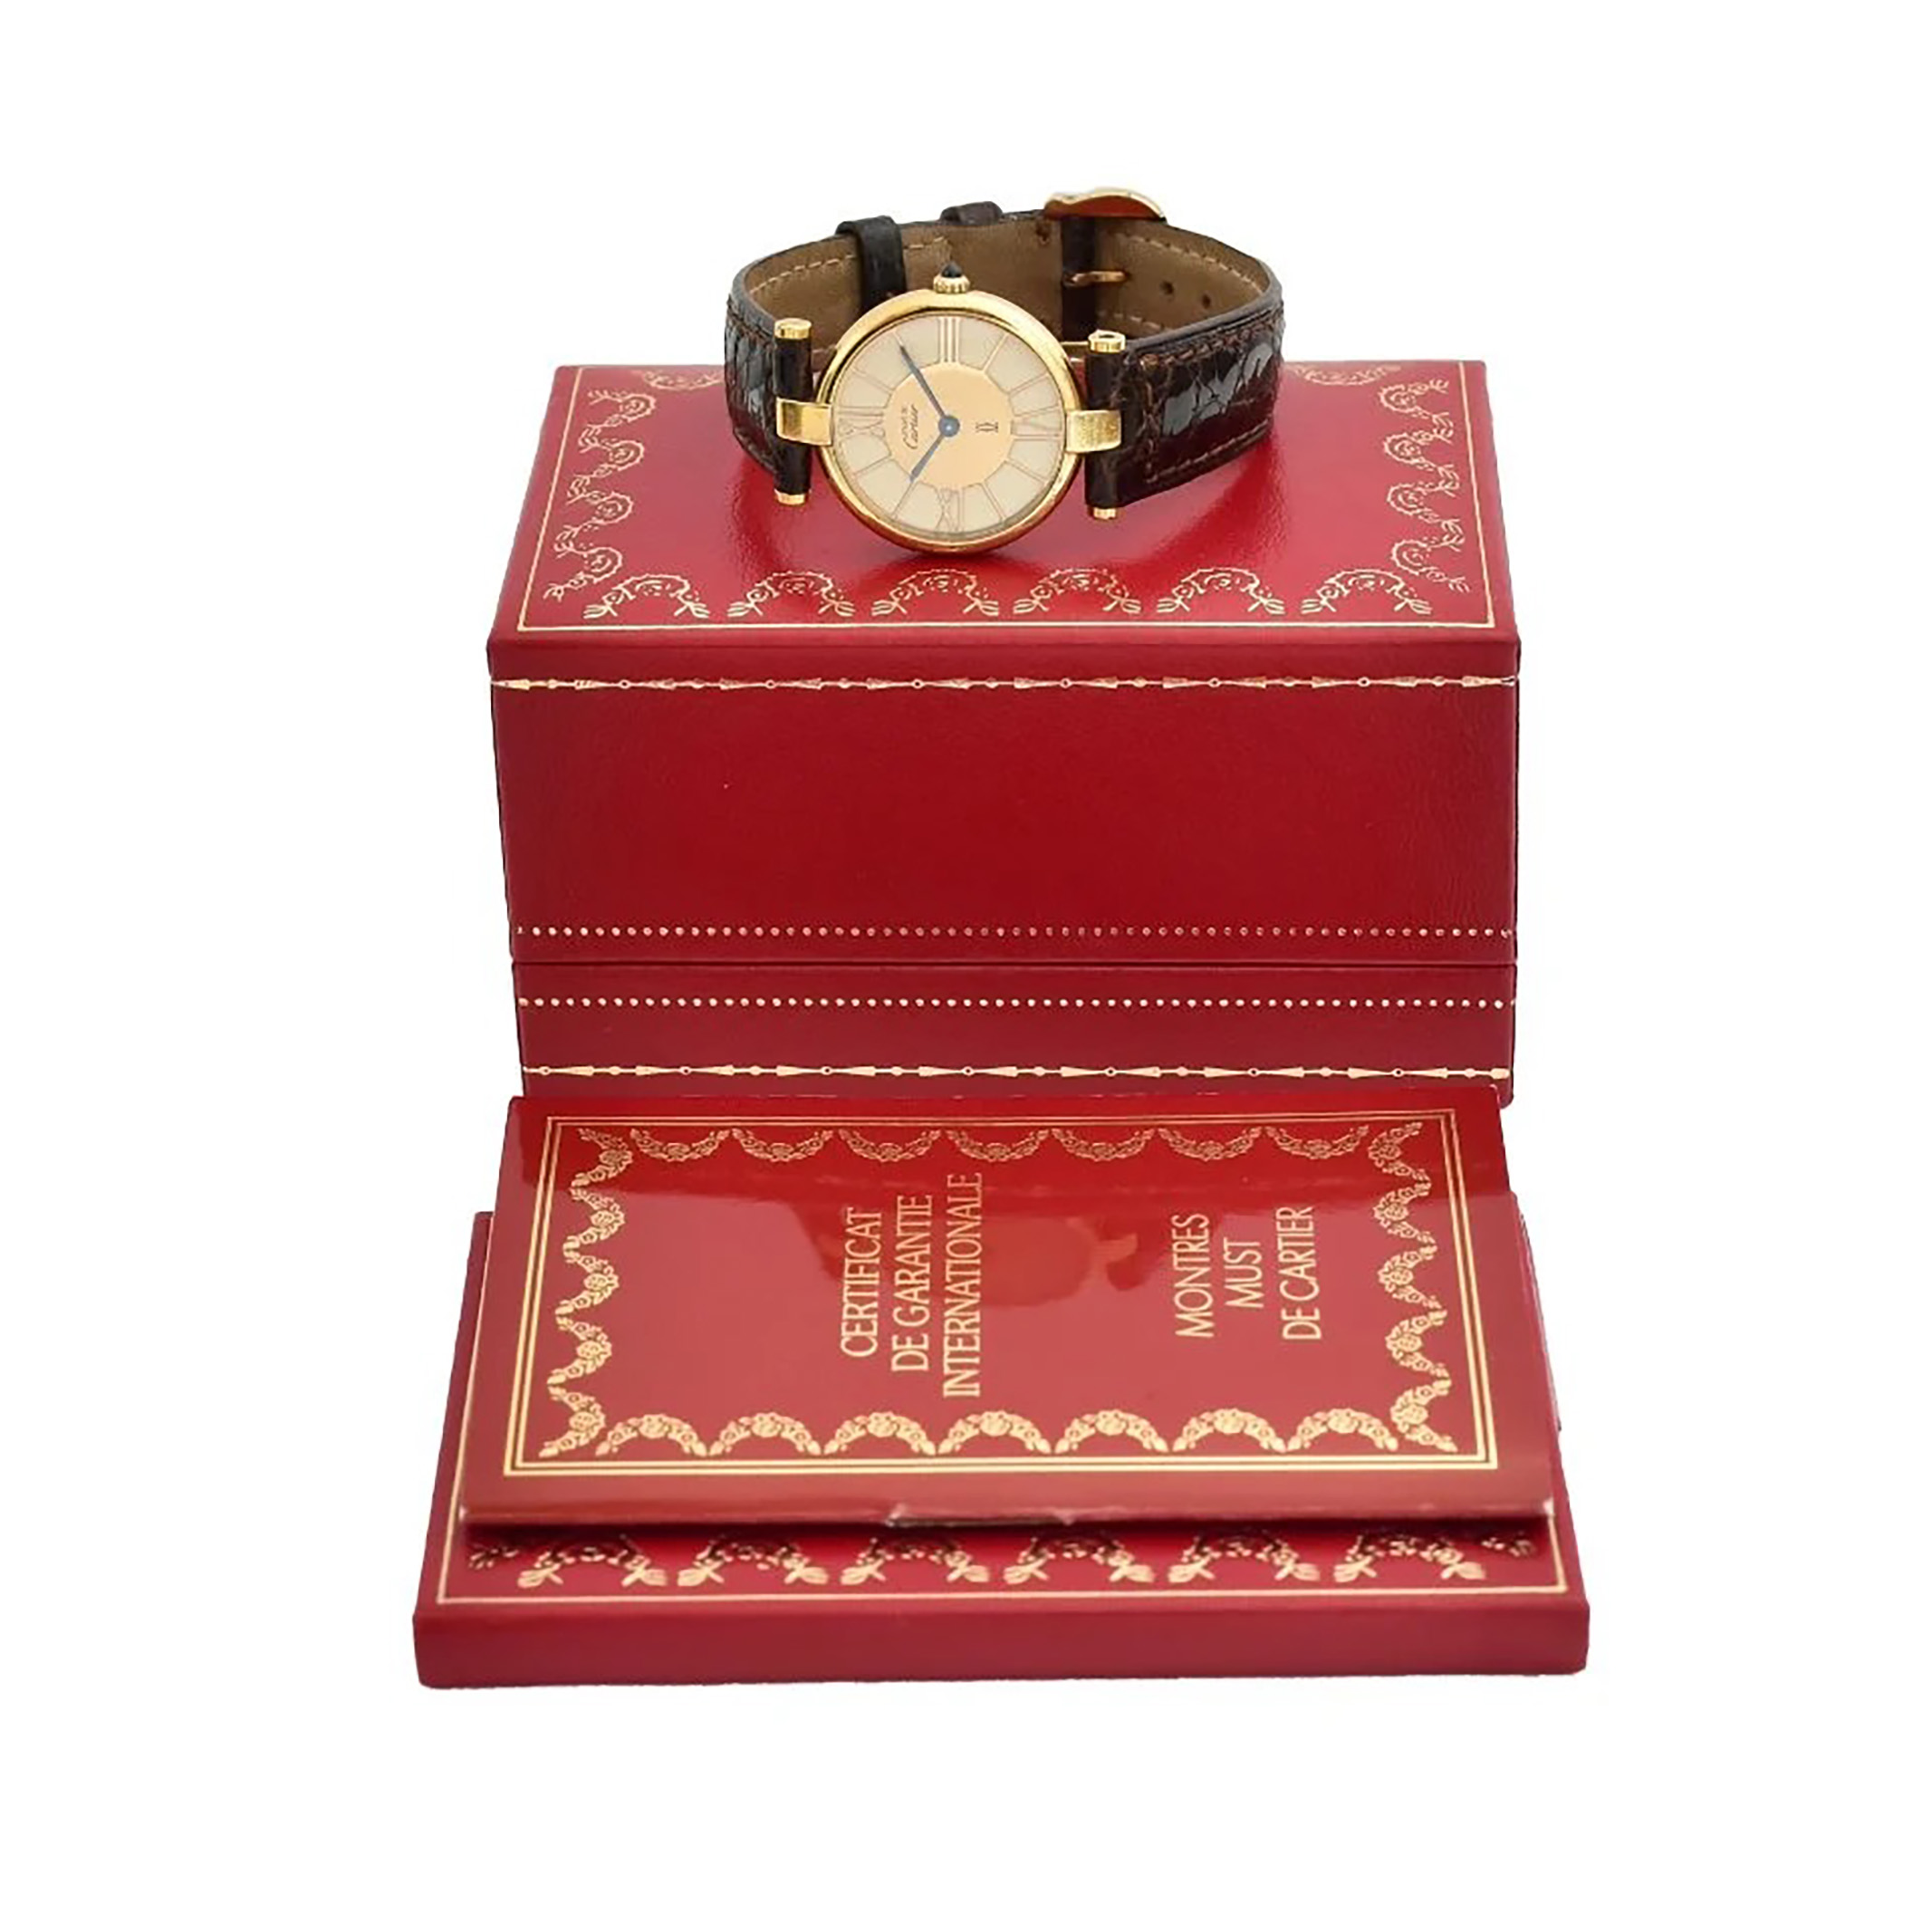 Cartier Must Vermeil 925 wristwatch box and papers - Image 7 of 7